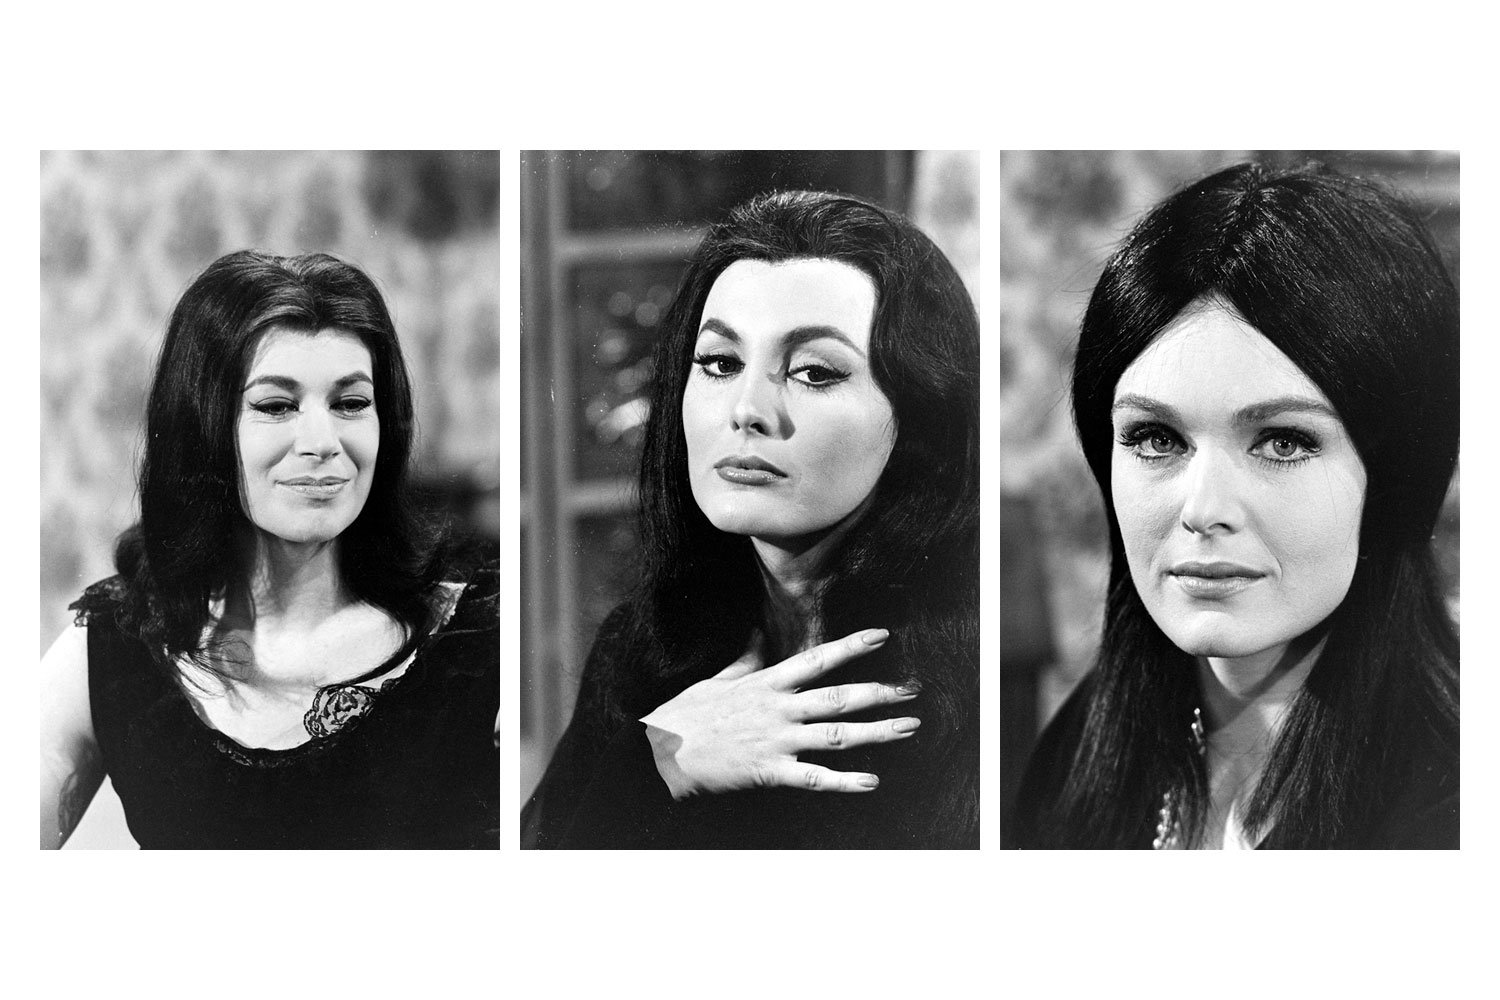 Unidentified actresses who tried out for the role of Morticia Addams, 1964.